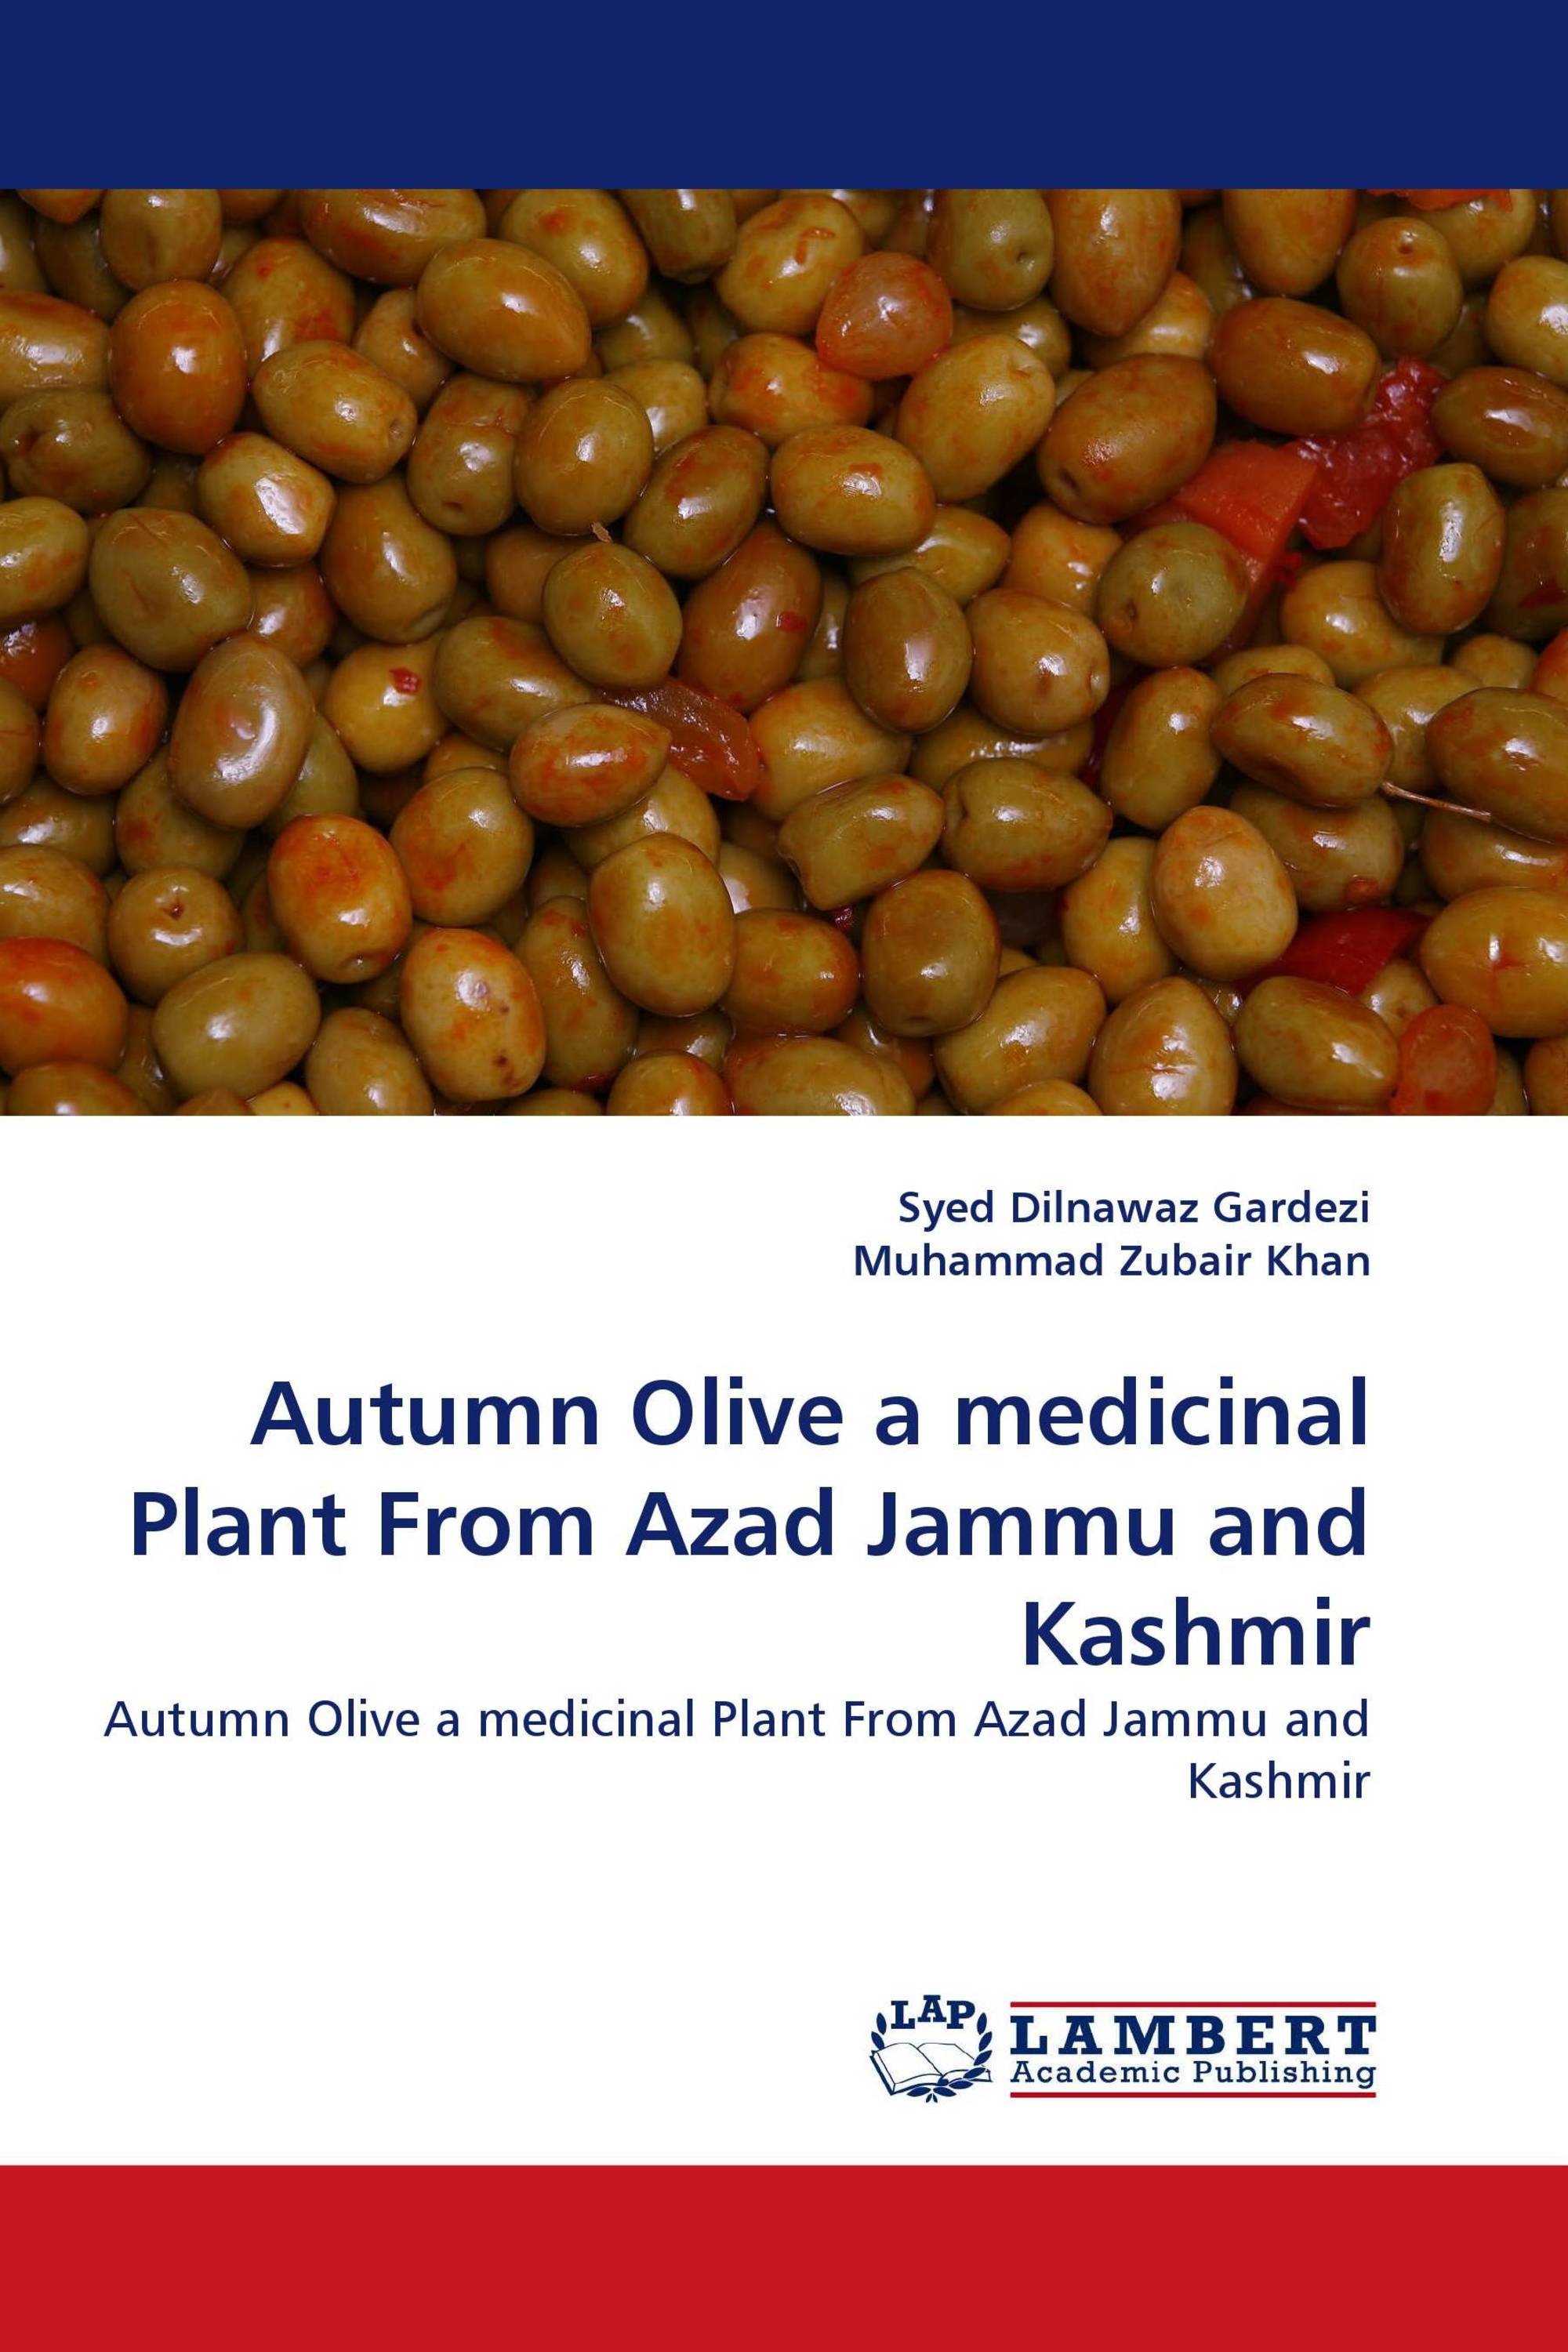 Autumn Olive a medicinal Plant From Azad Jammu and Kashmir